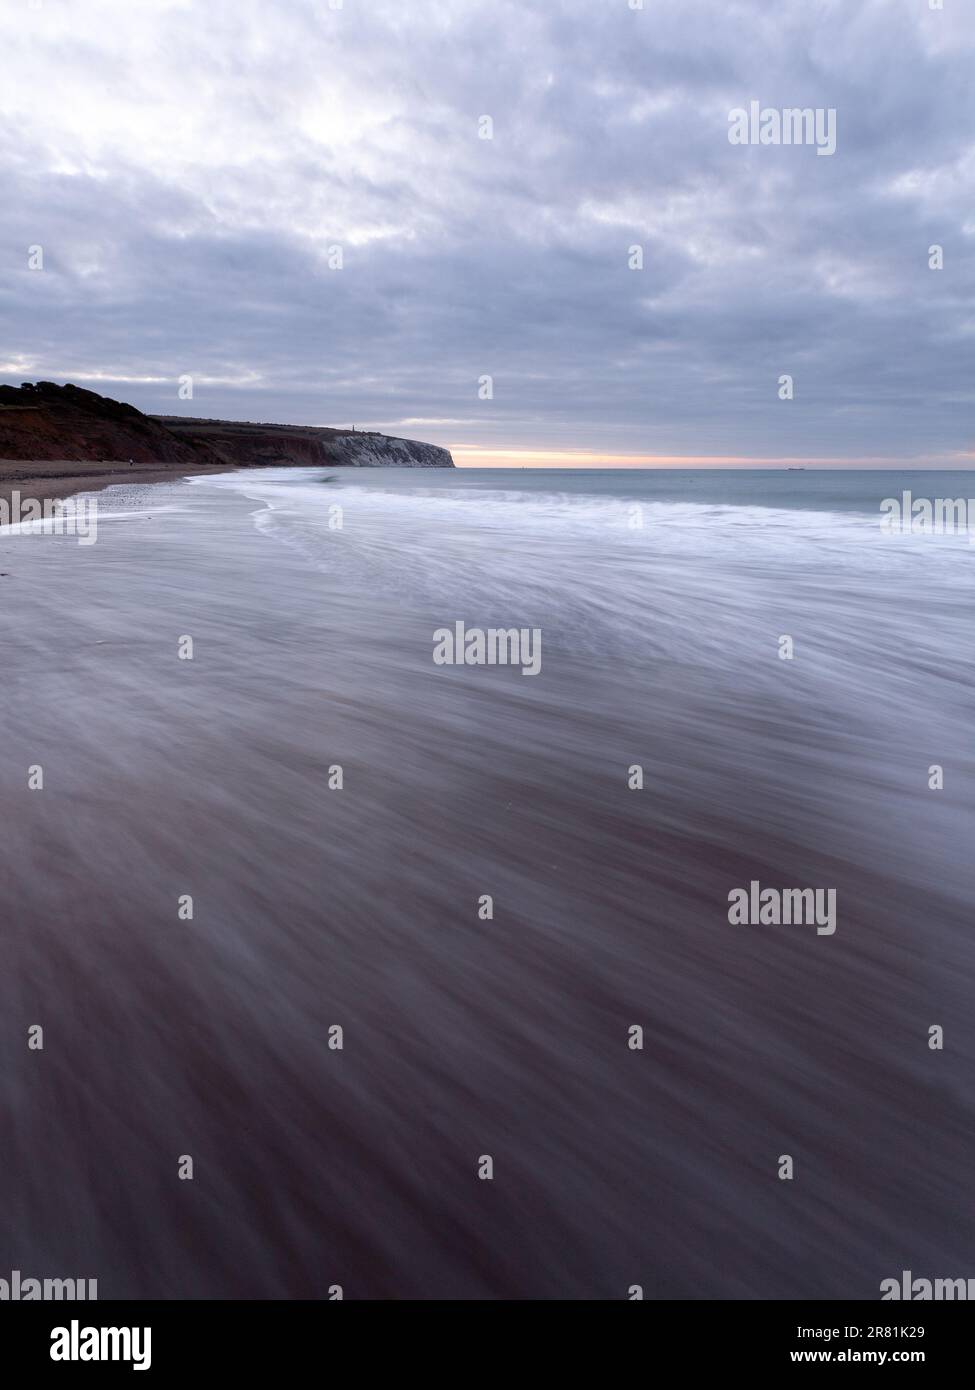 Isle of Wight Seascapes: Embracing the Ebb and Flow of Nature's Sunrise and Sunset Spectacles Stock Photo